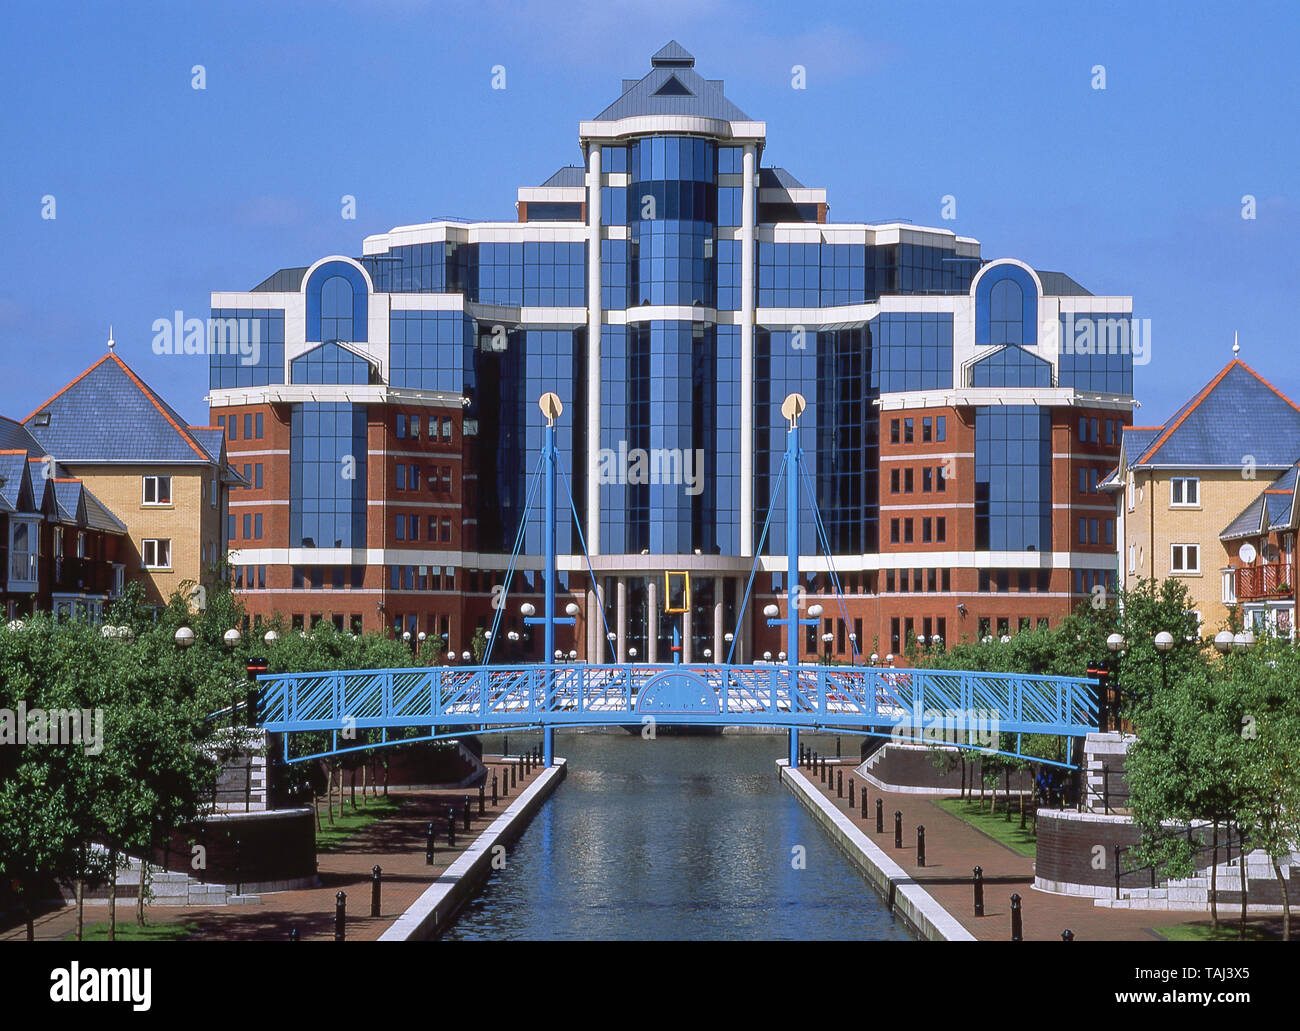 The Victoria Building, Salford Quays, Salford, Greater Manchester, England, United Kingdom Stock Photo